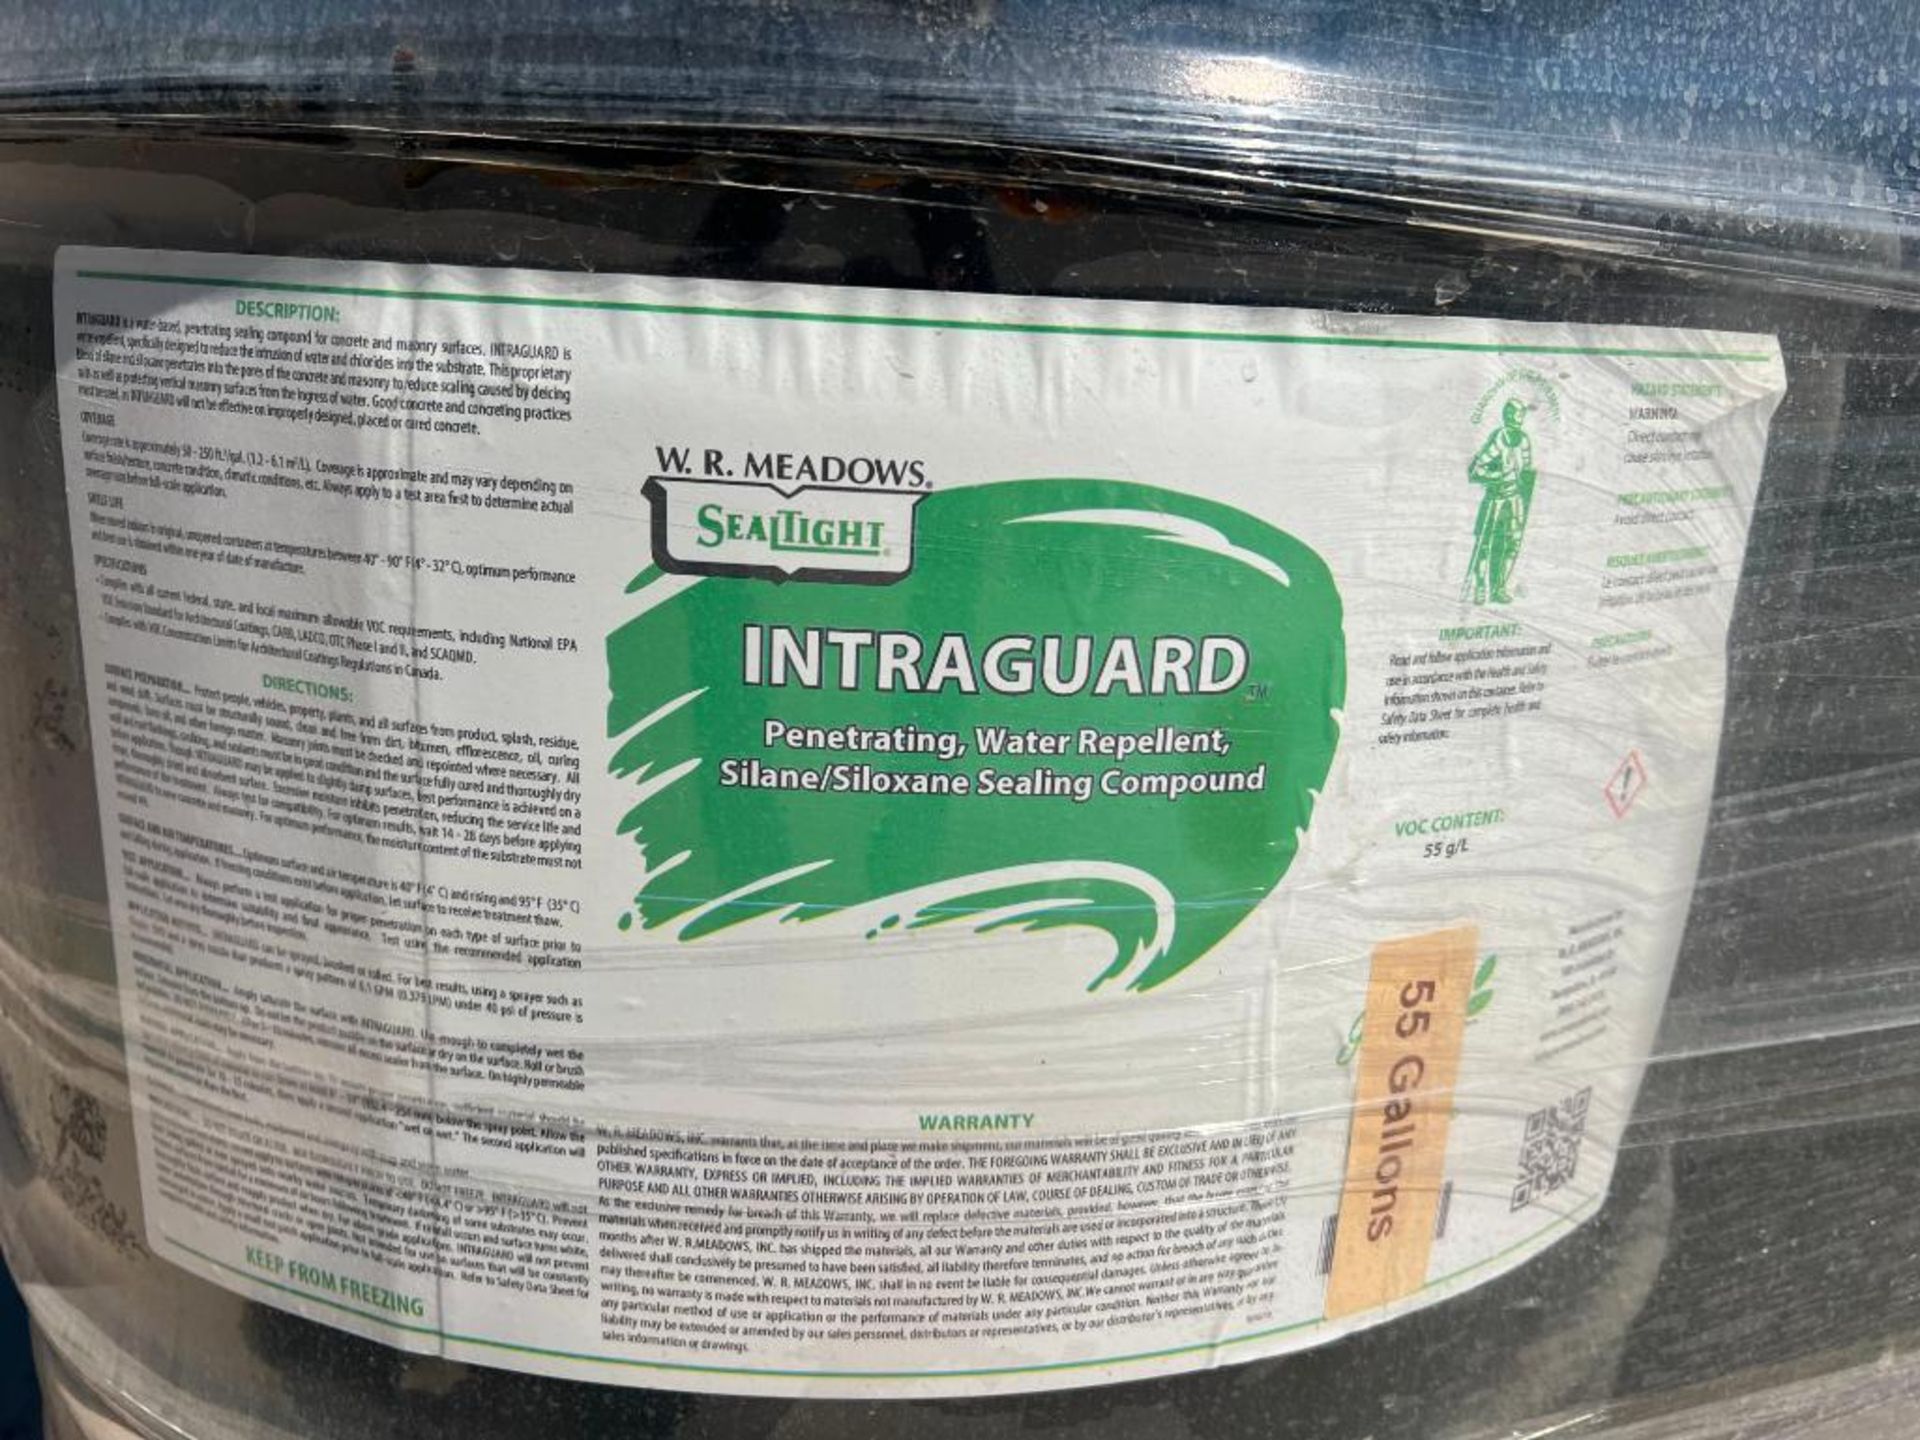 55 Gallon Drums W.R. Meadows, Inc. Seal Tight, DR Intraguard Penetrating, Water Repellent, Silane/Si - Image 2 of 3